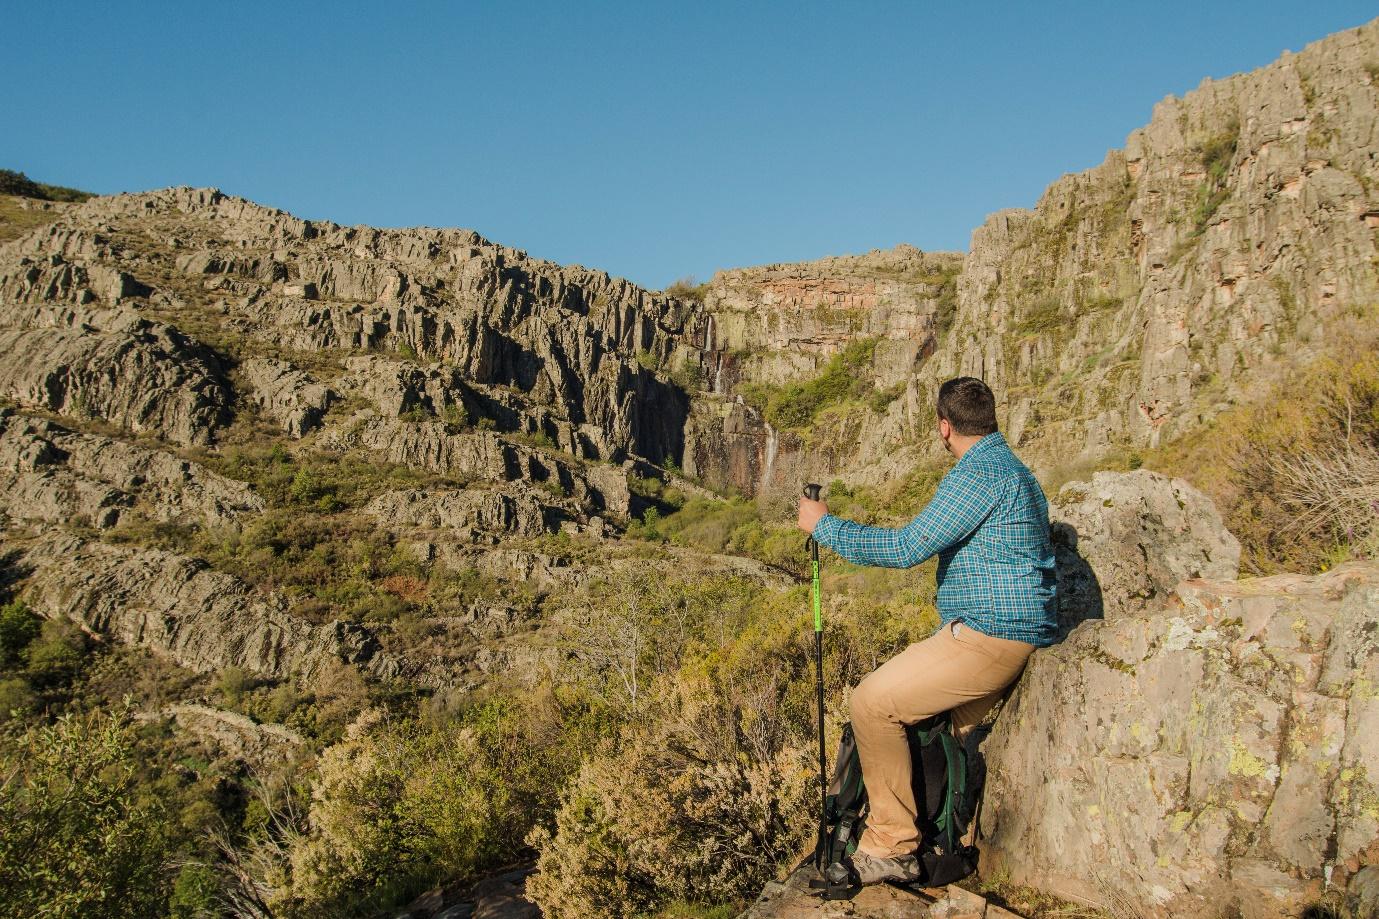 A person sitting on a rock looking at a rocky cliff
Description automatically generated